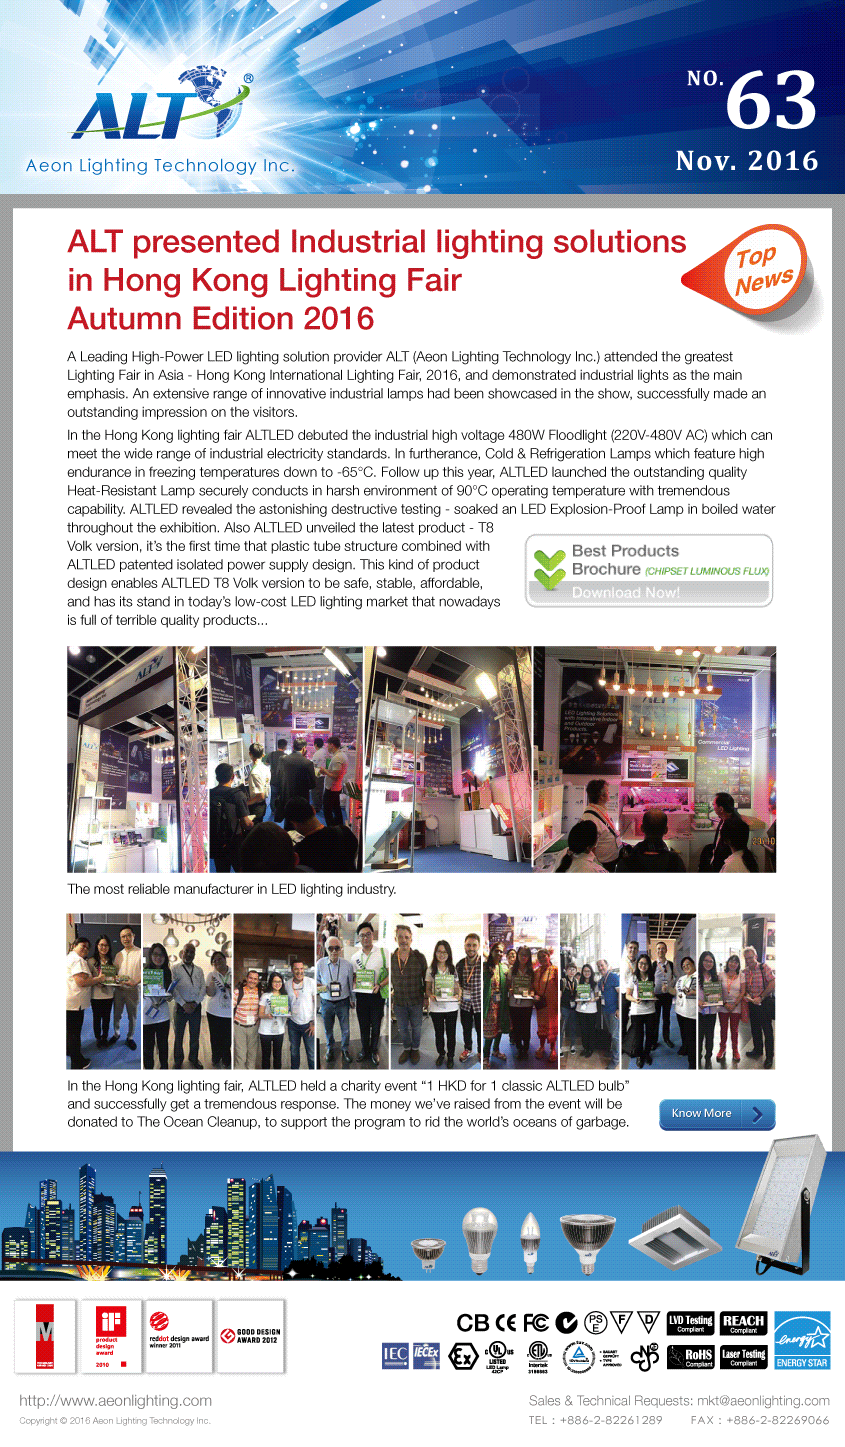 A Leading High-Power LED lighting solution provider ALT (Aeon Lighting Technology Inc.) attended the greatest Lighting Fair in Asia - Hong Kong International Lighting Fair, 2016, and demonstrated industrial lights as the main emphasis. An extensive range of innovative industrial lamps had been showcased in the show, successfully made an outstanding impression on the visitors.